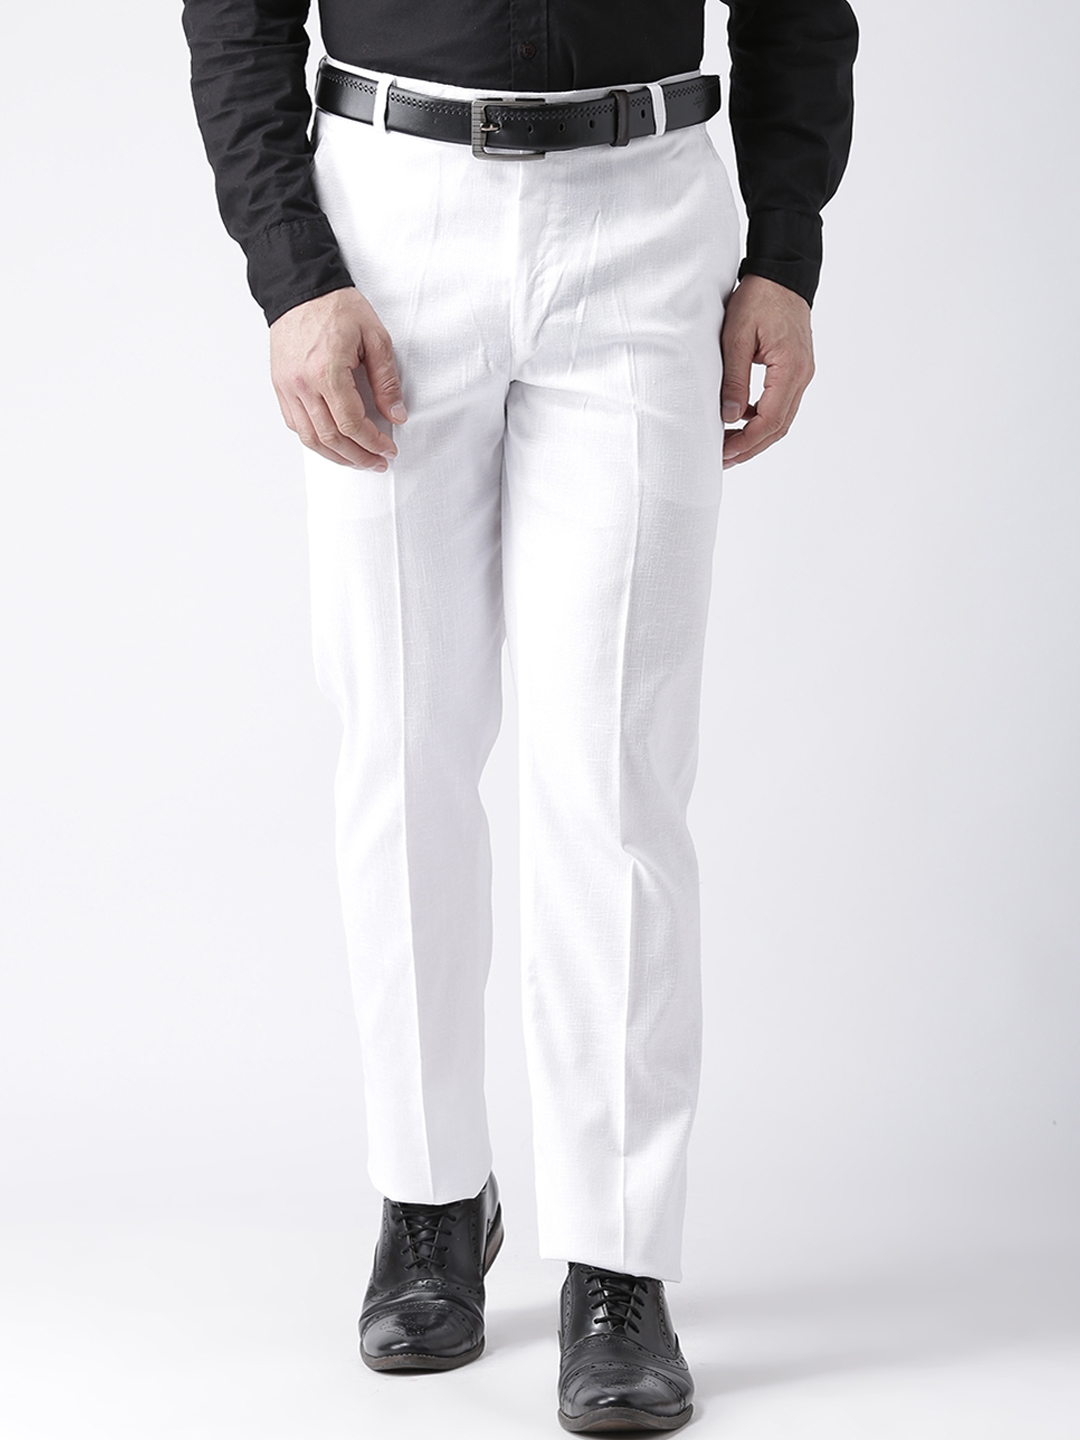 Buy Premium Formal Trousers For Men Online in India | SNTCH – SNITCH-saigonsouth.com.vn